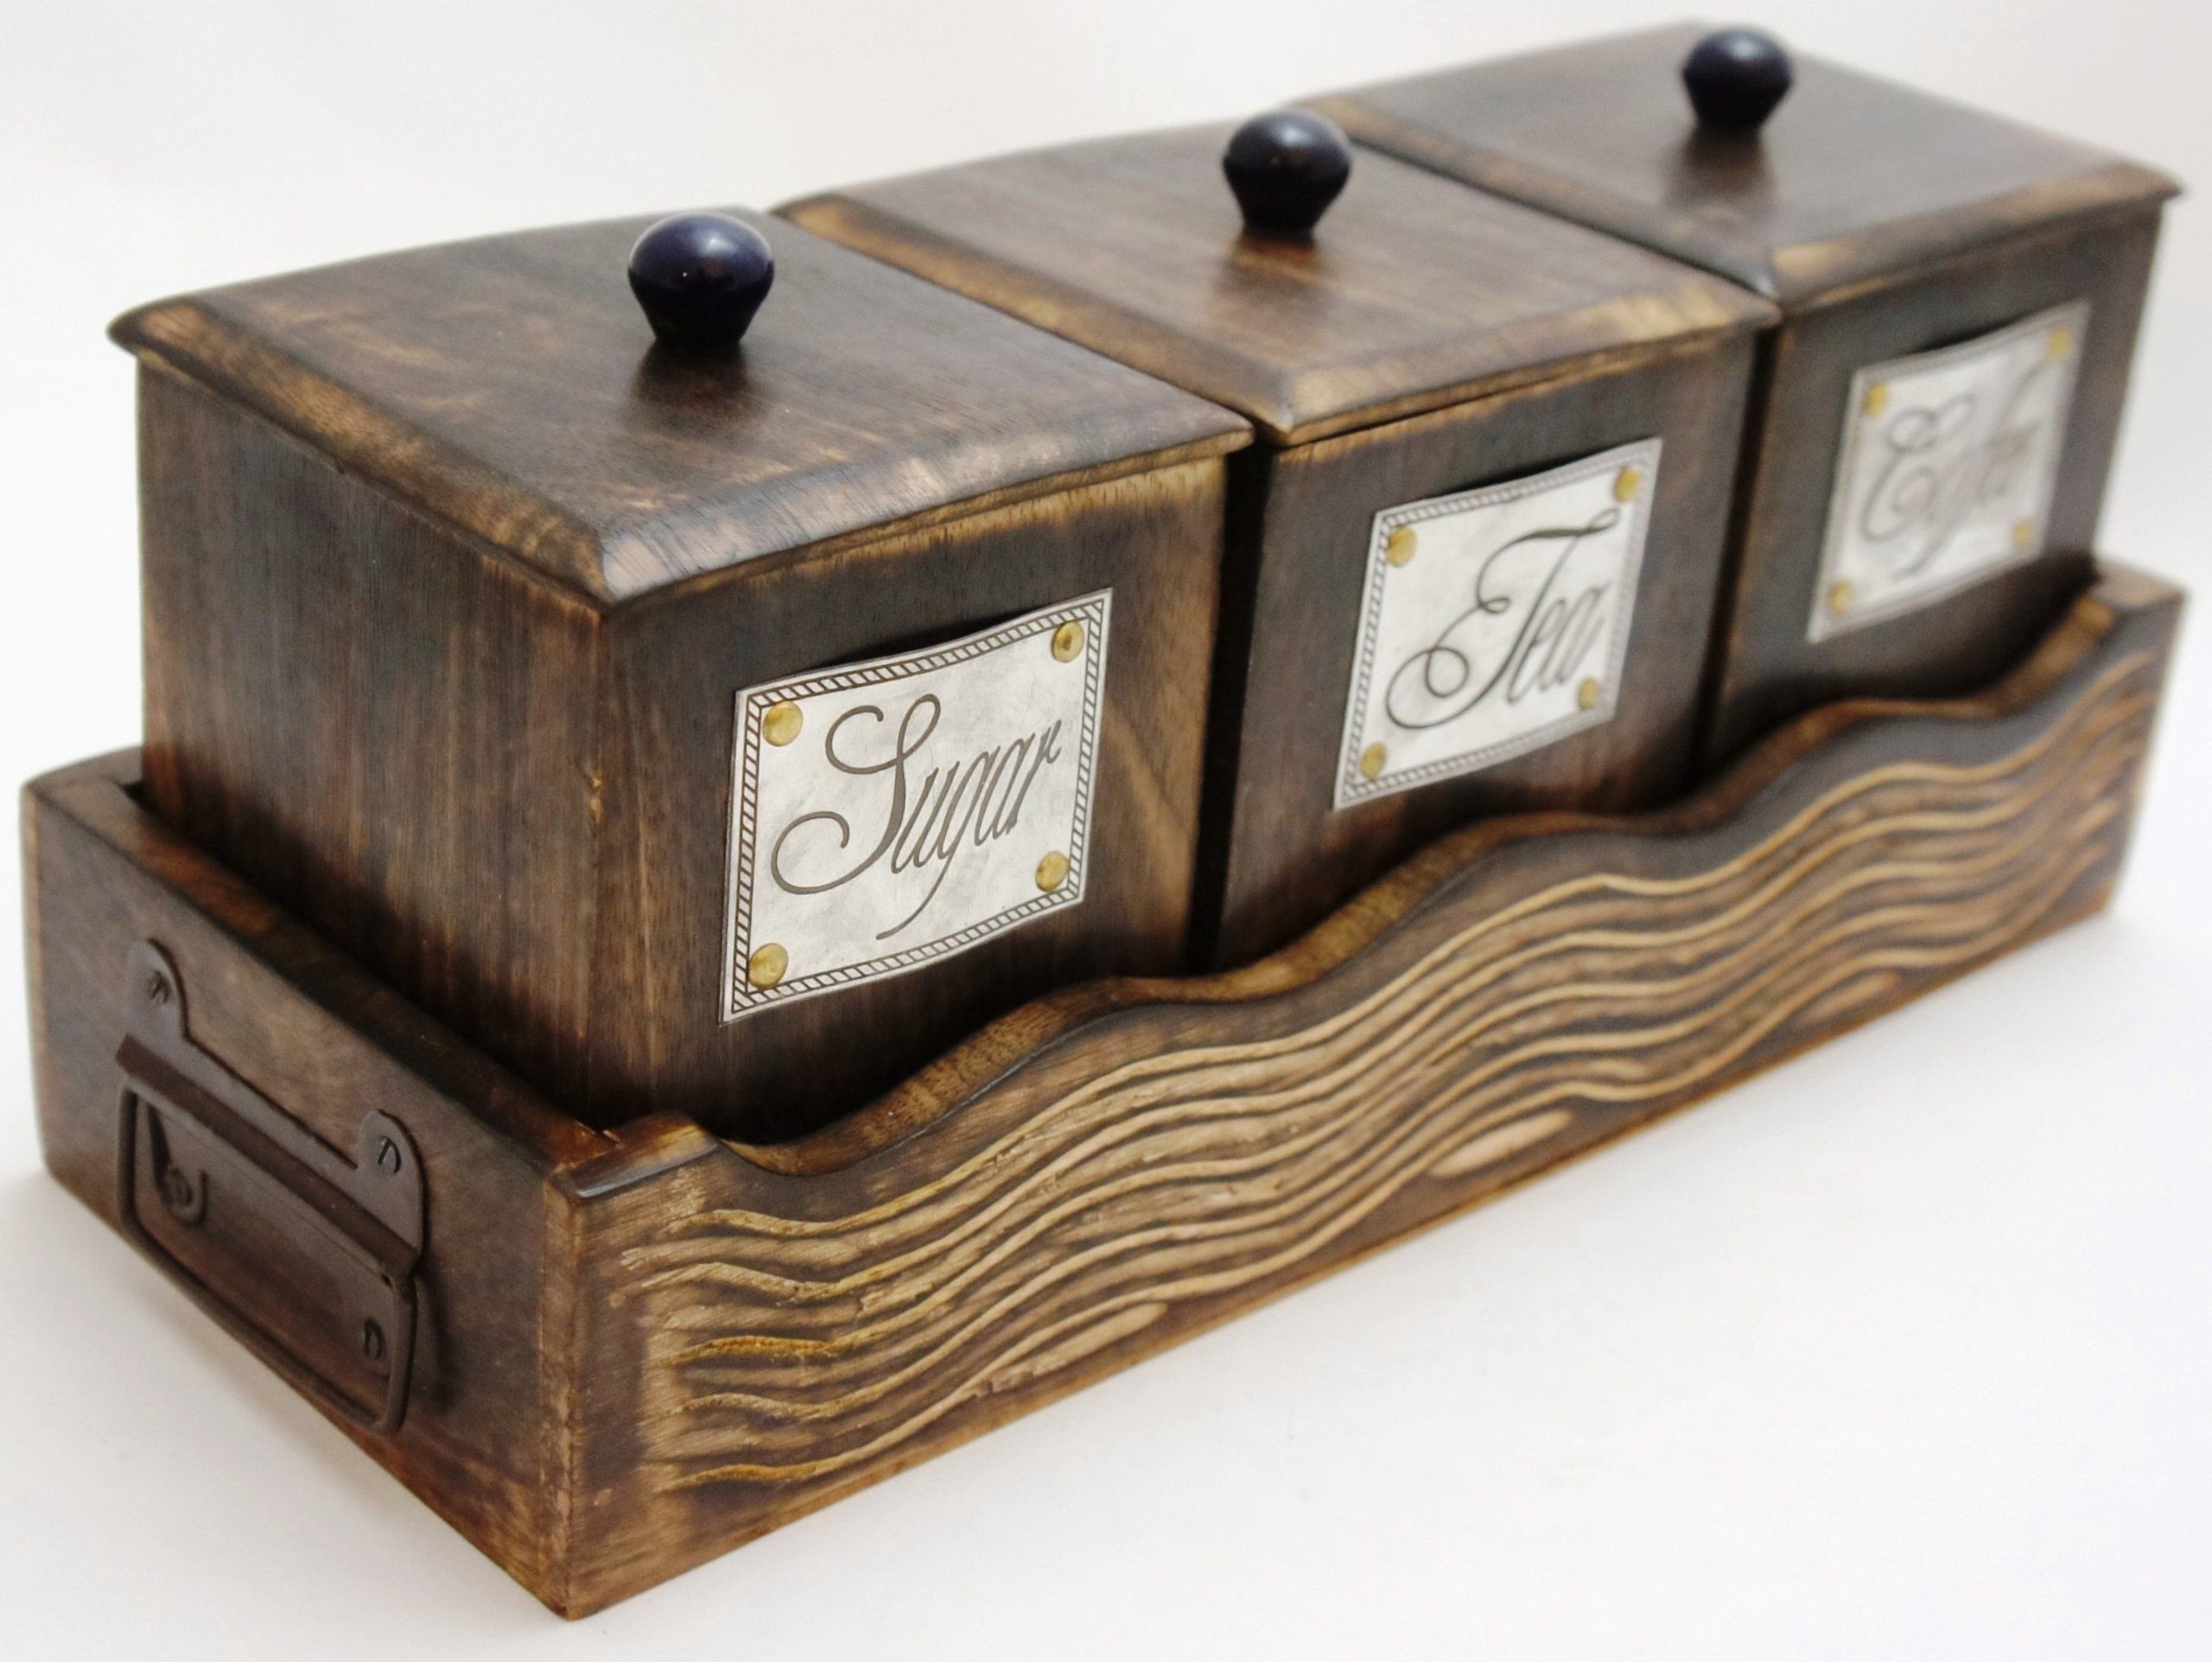 Handcrafted Wooden Antique Look Tea Coffee Sugar 3 Piece Canister Set Made of Mango Wood Large